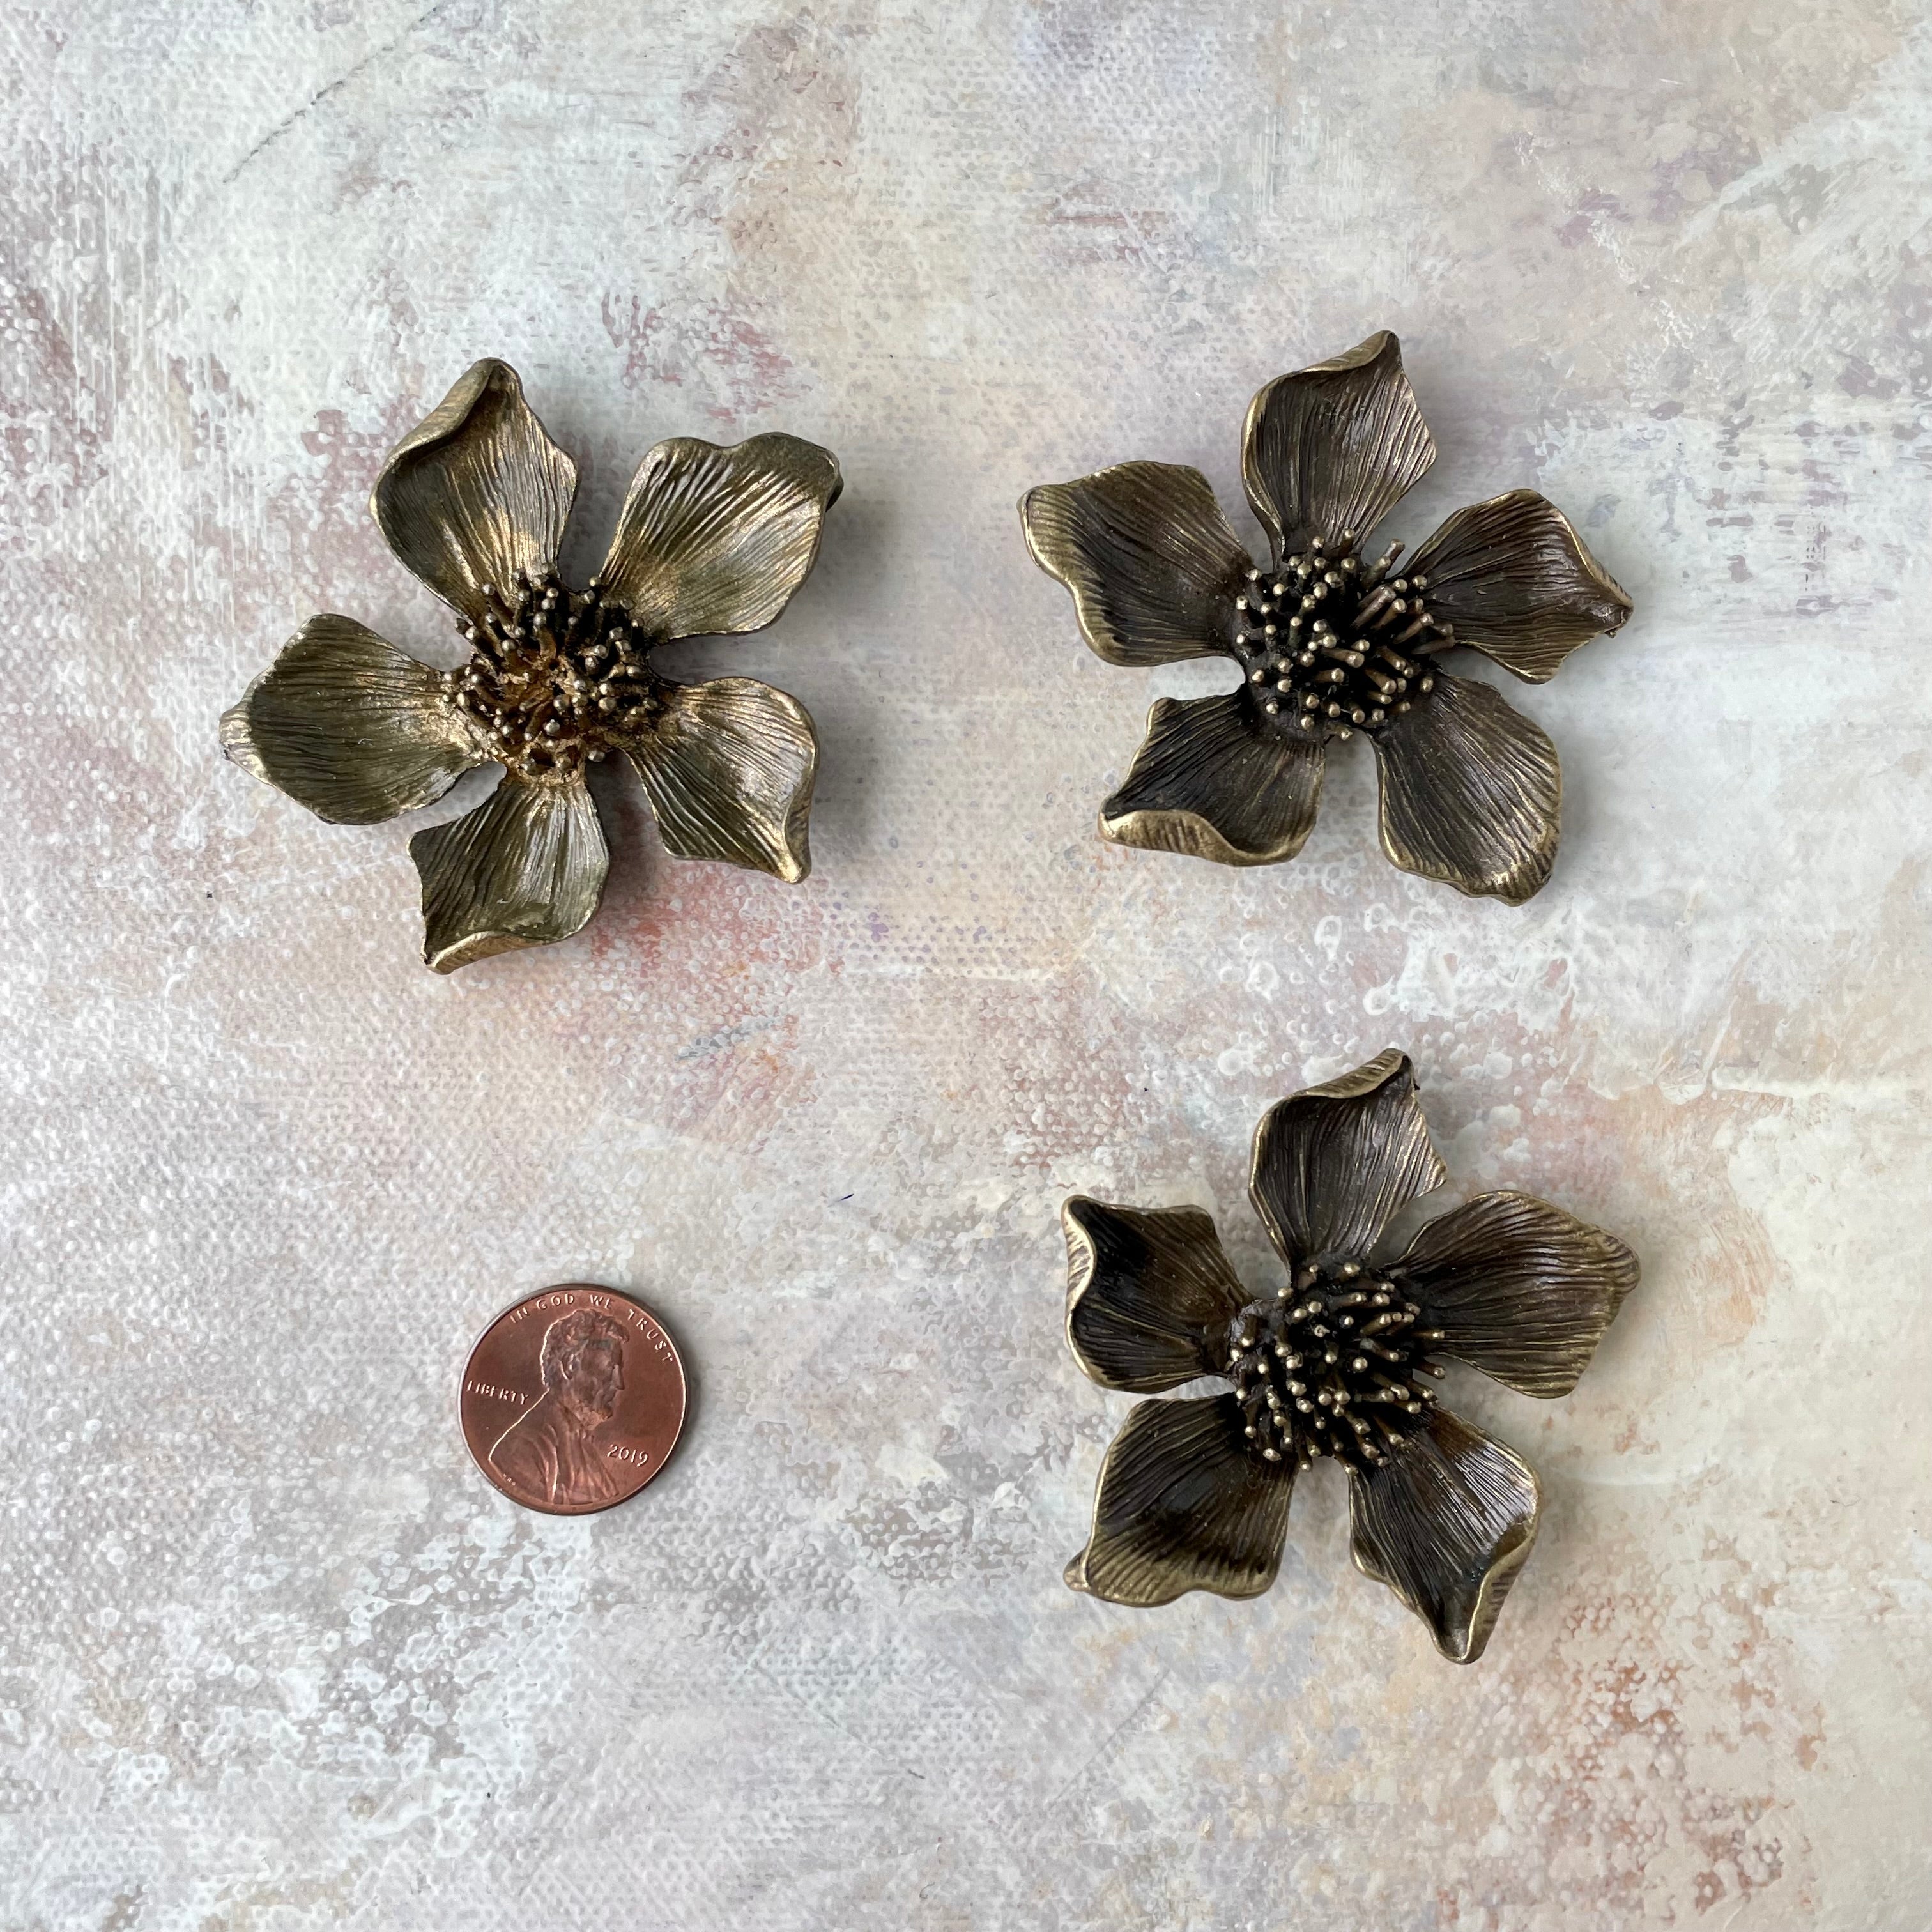 3 larger metal styling flower with penny beside for size reference - flat lay props from Champagne & GRIT